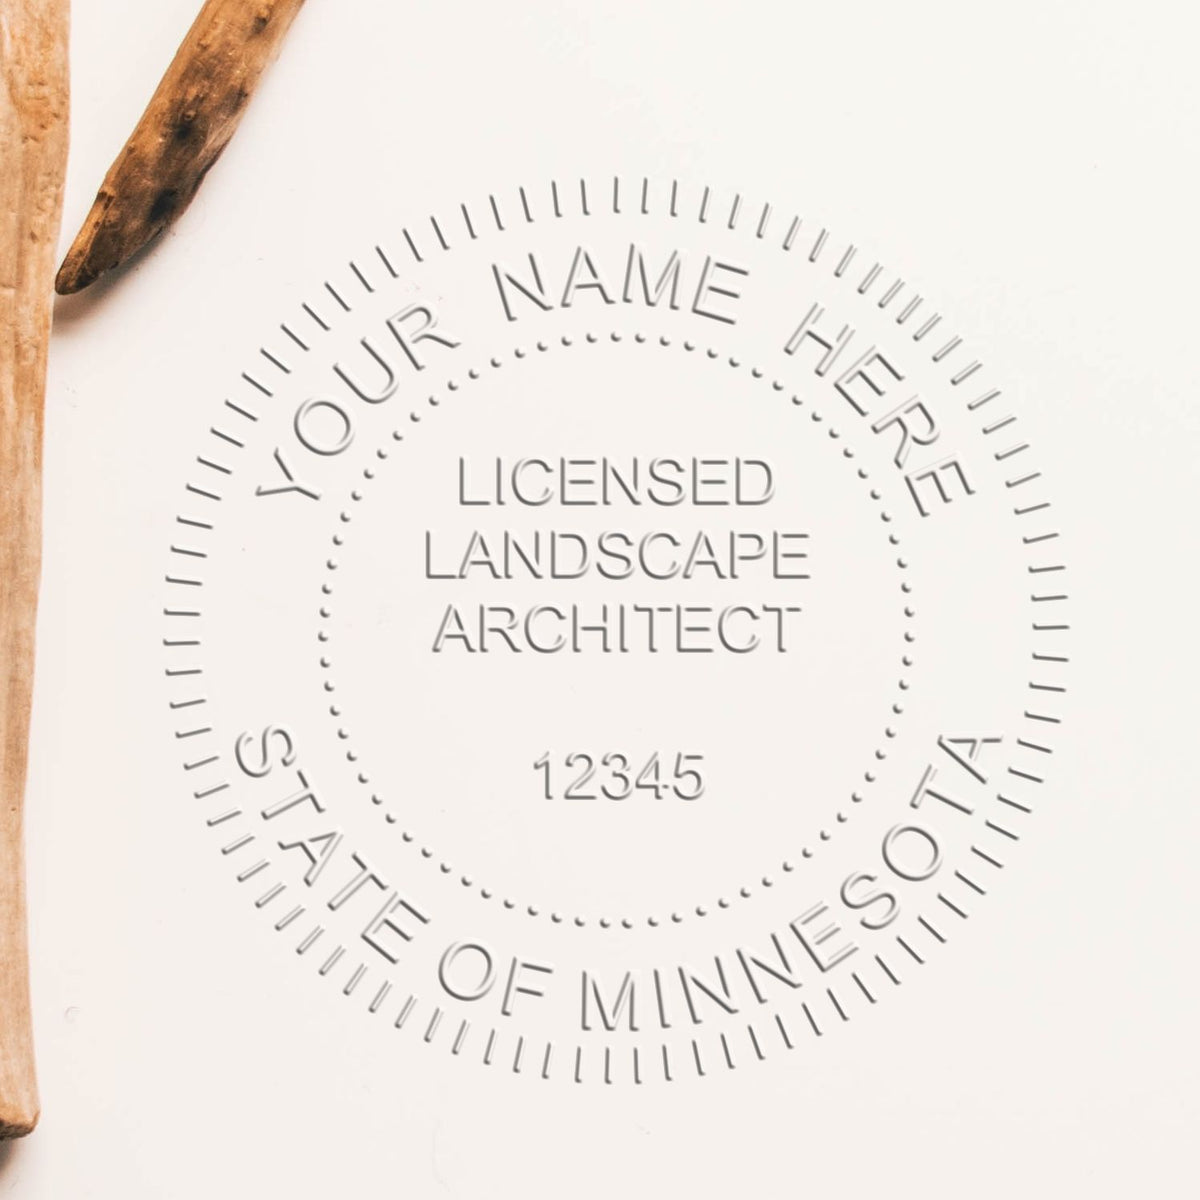 The Gift Minnesota Landscape Architect Seal stamp impression comes to life with a crisp, detailed image stamped on paper - showcasing true professional quality.